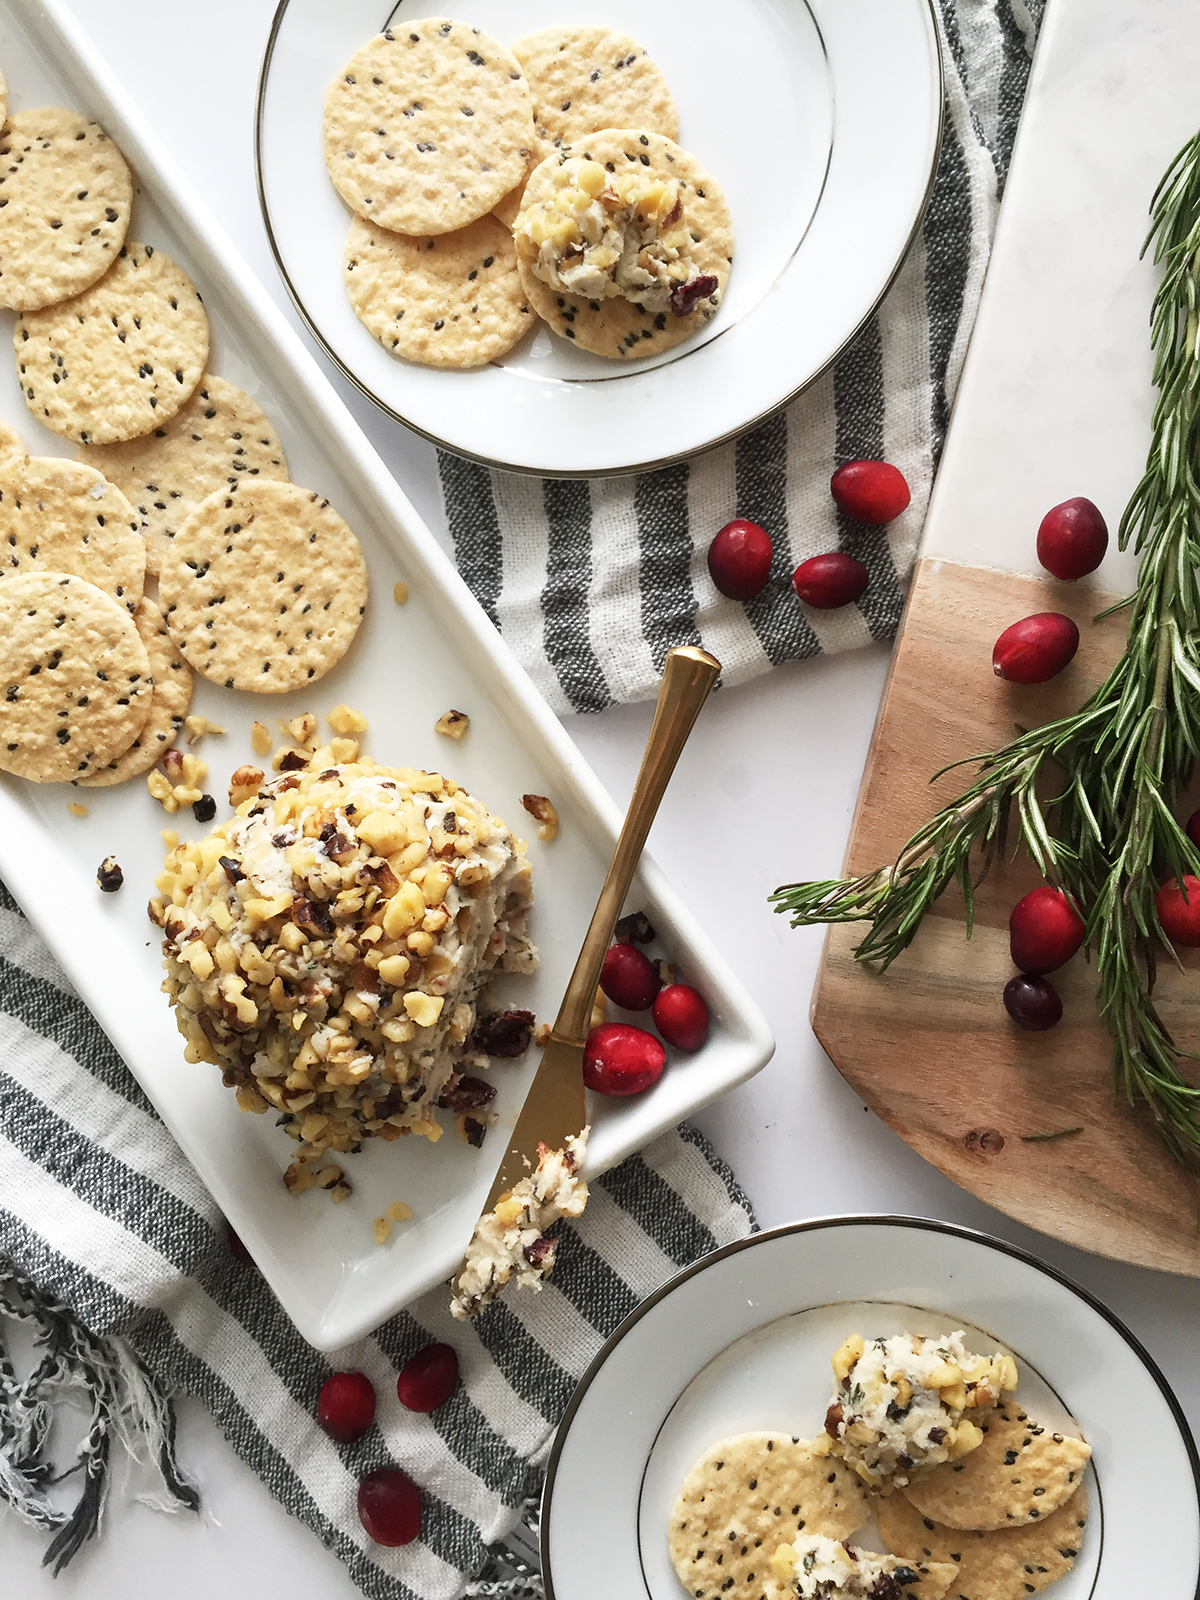 The " I can't believe it's not cheese" Vegan Cheeseball with rosemary, cranberry and walnuts | ineverything.ca